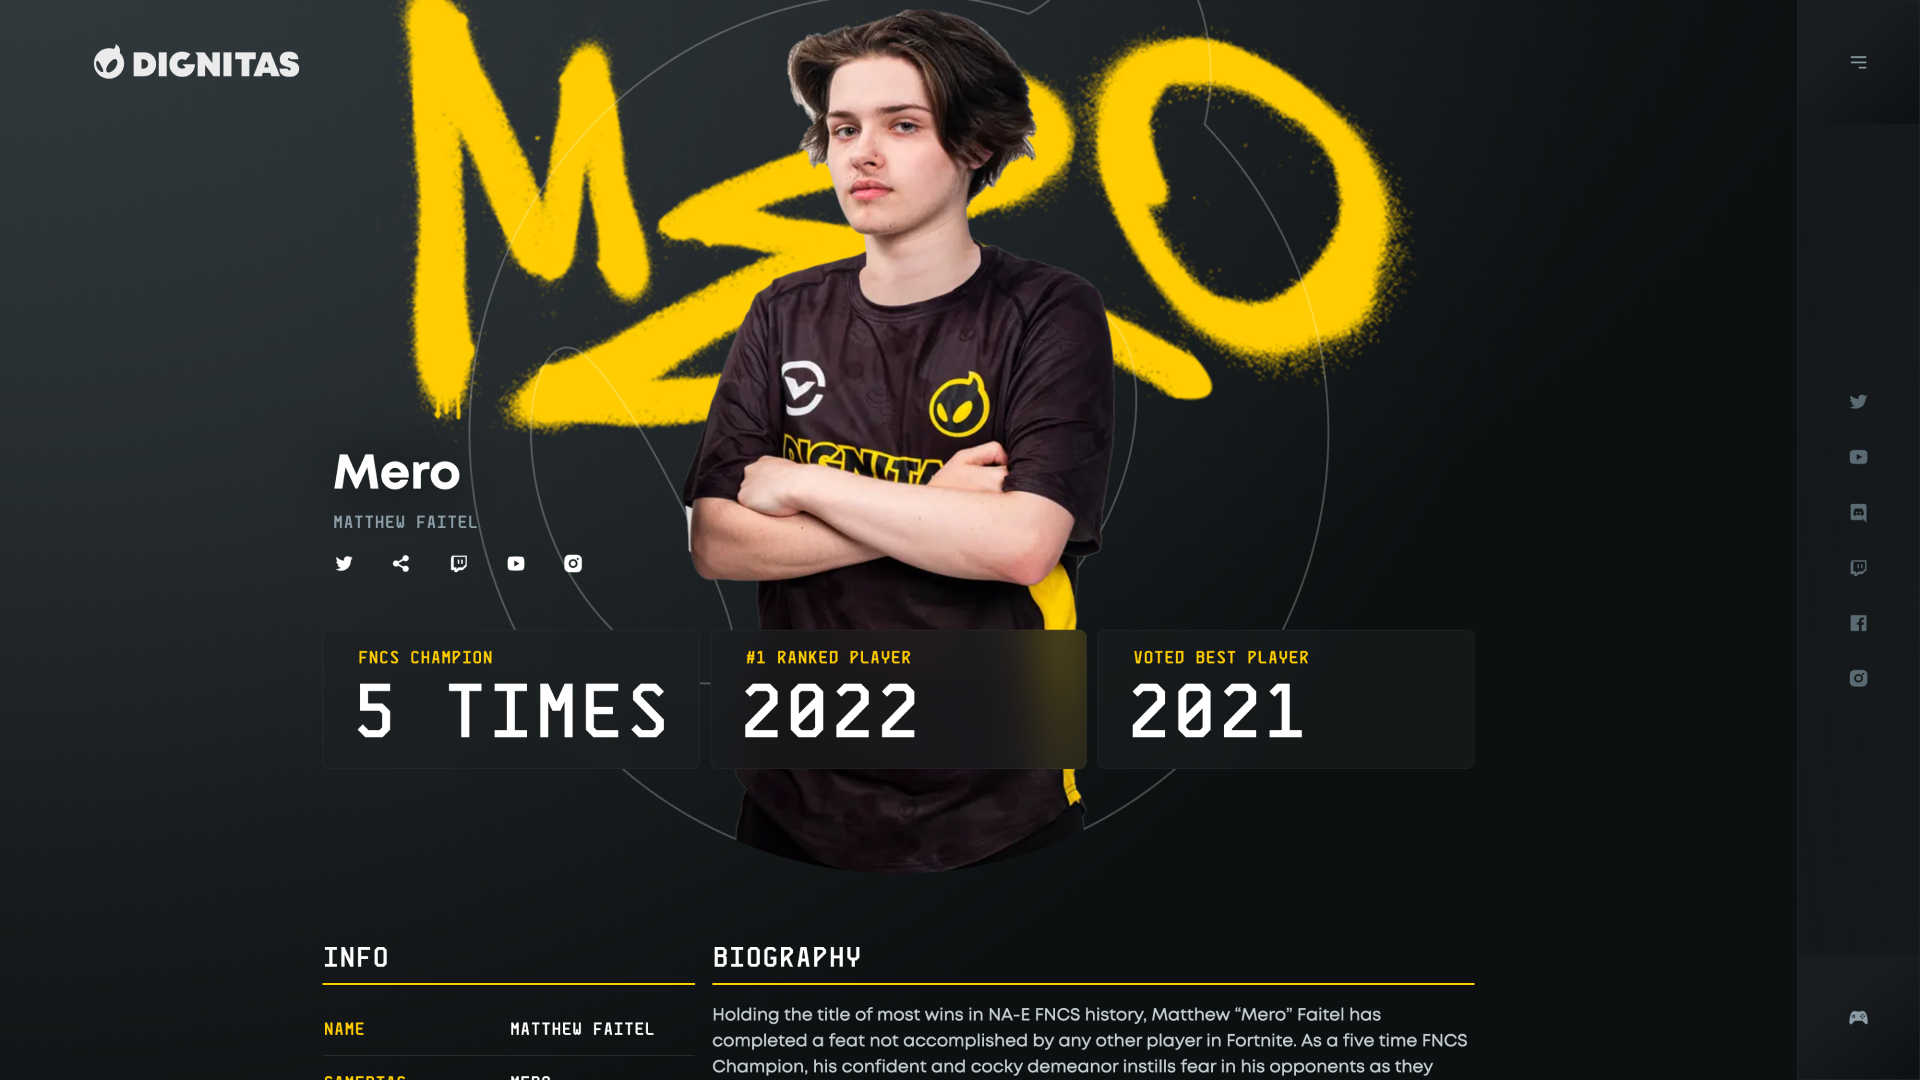 A screenshot from a dignitas.gg player page. An esports player posing for a headshot. Their name is in graffiti behind them. Data about their achievements is displayed below. The style is very modern.